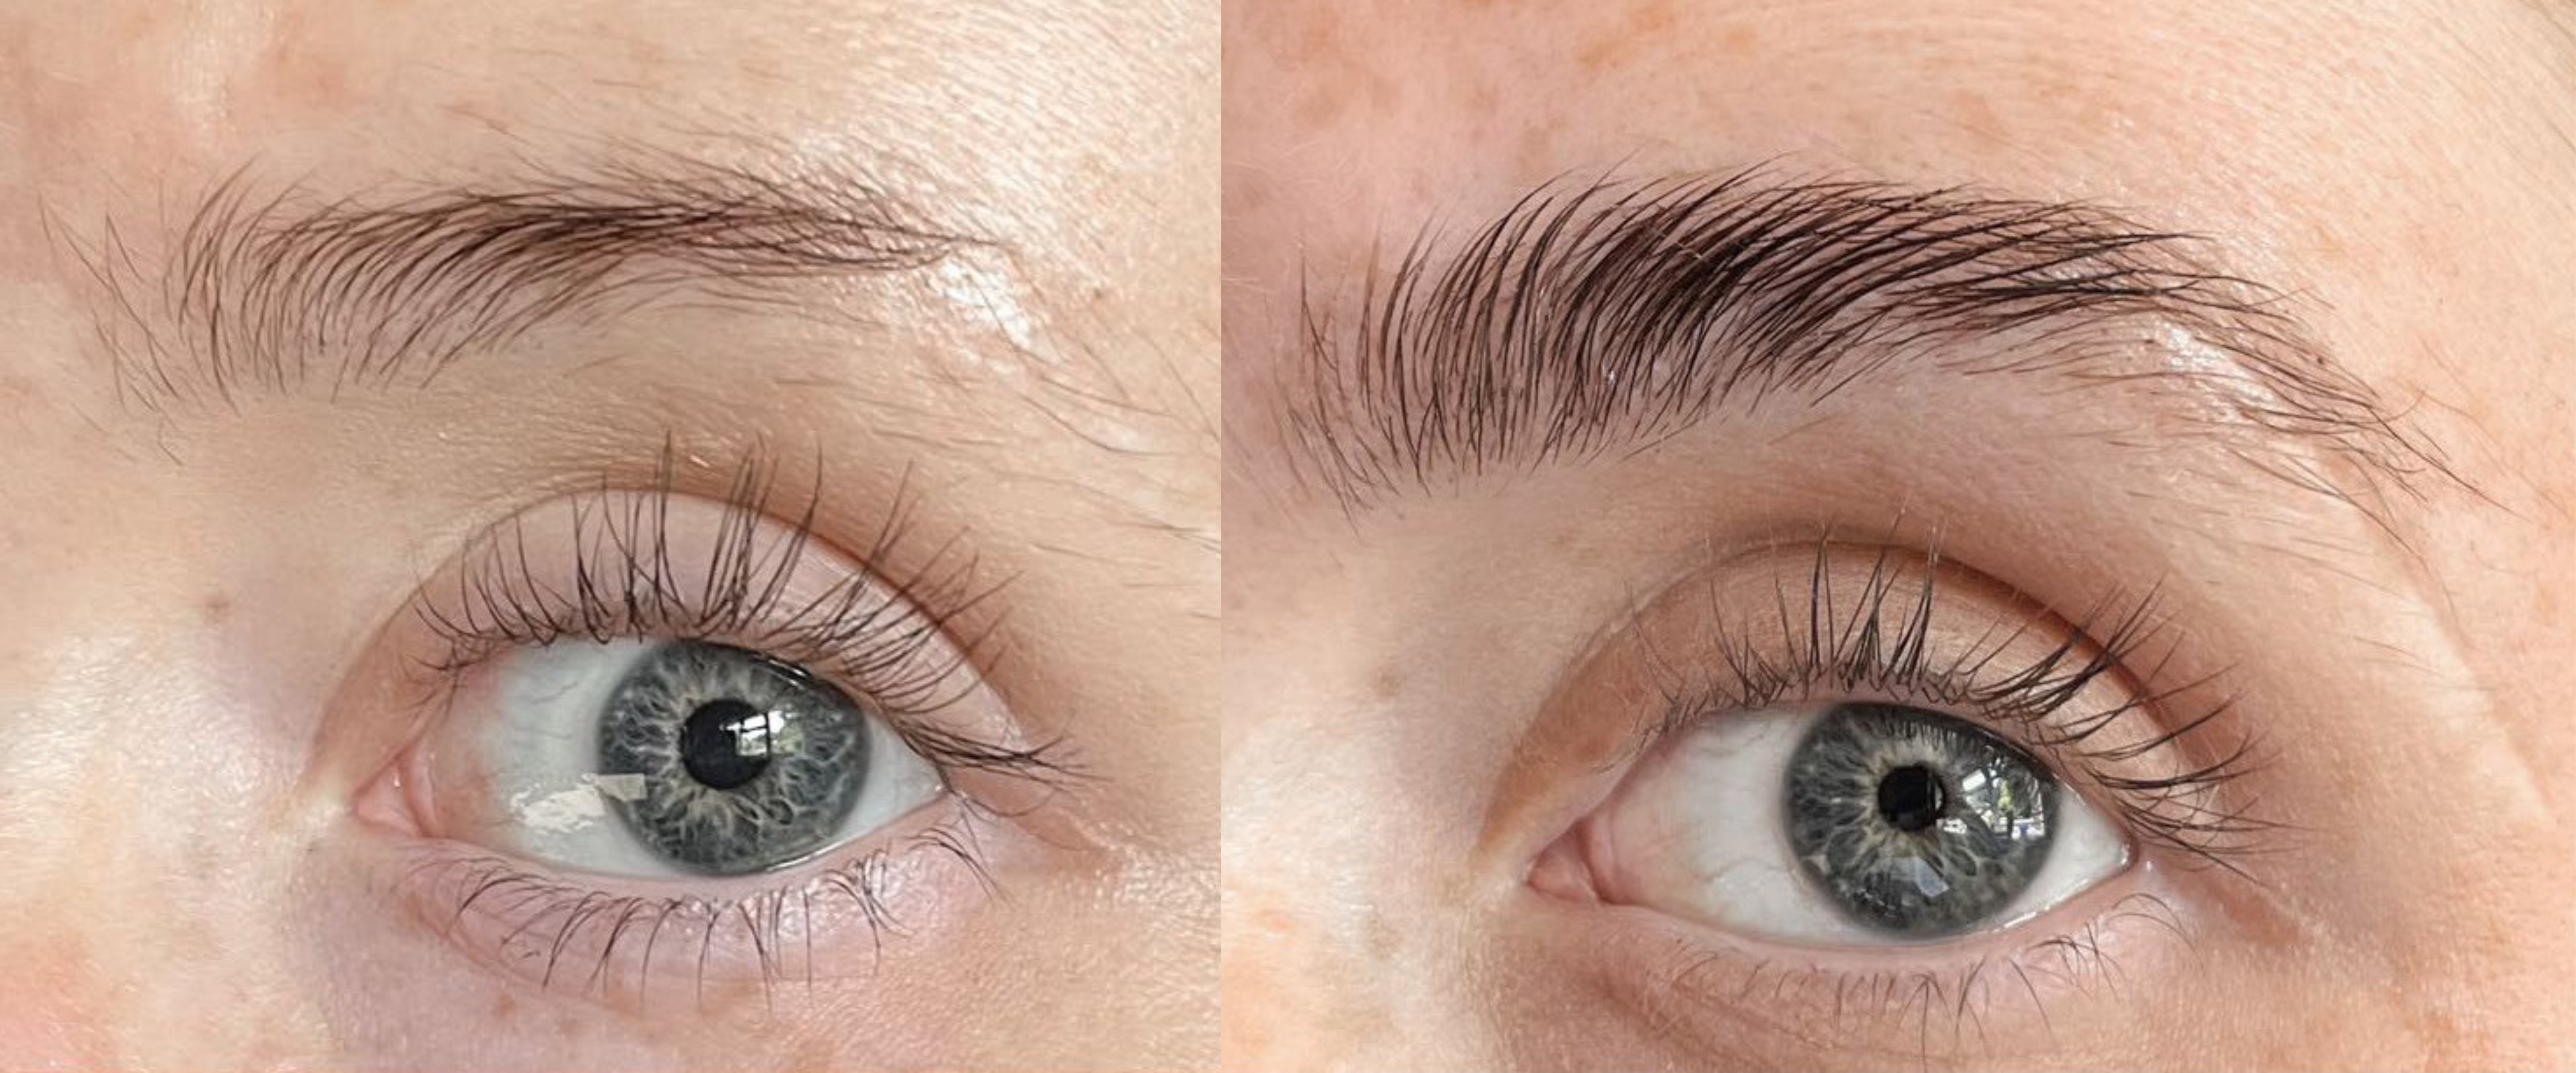 Do Glow For It Serums Address Causes Of Lash & Brow Thinning?